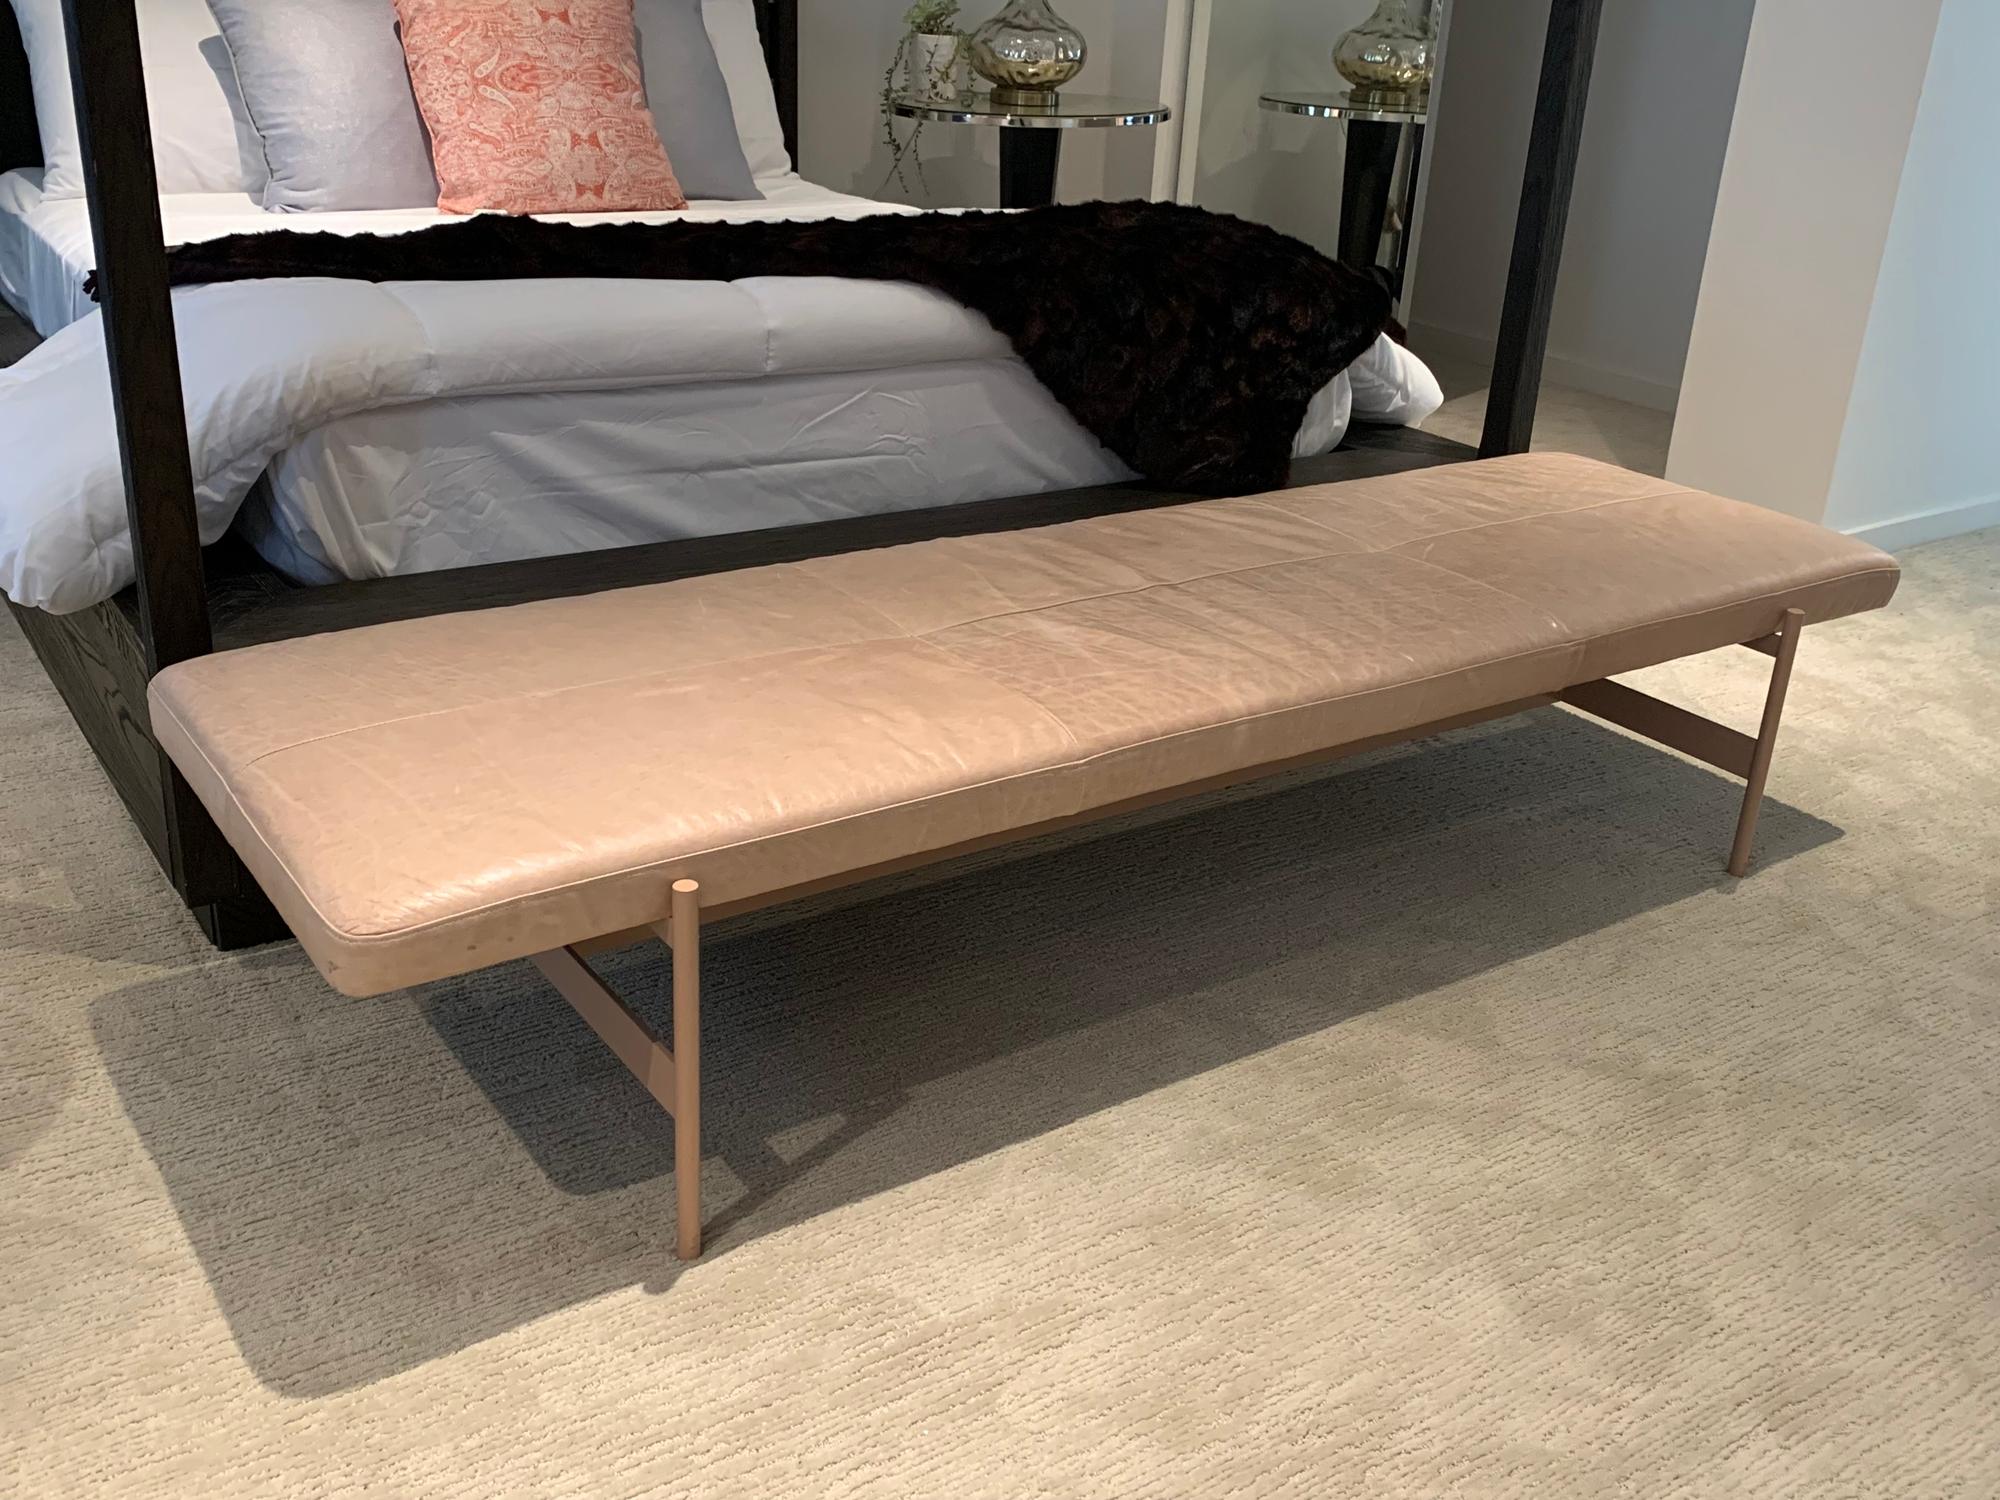 Beautiful long bench in painted metal upholstered in a blush colored leather, very good condition with some wear to leather but no holes or rips, the metal frame is solid and painted in a similar color to the leather.
Measures: 74” wide x 24” deep